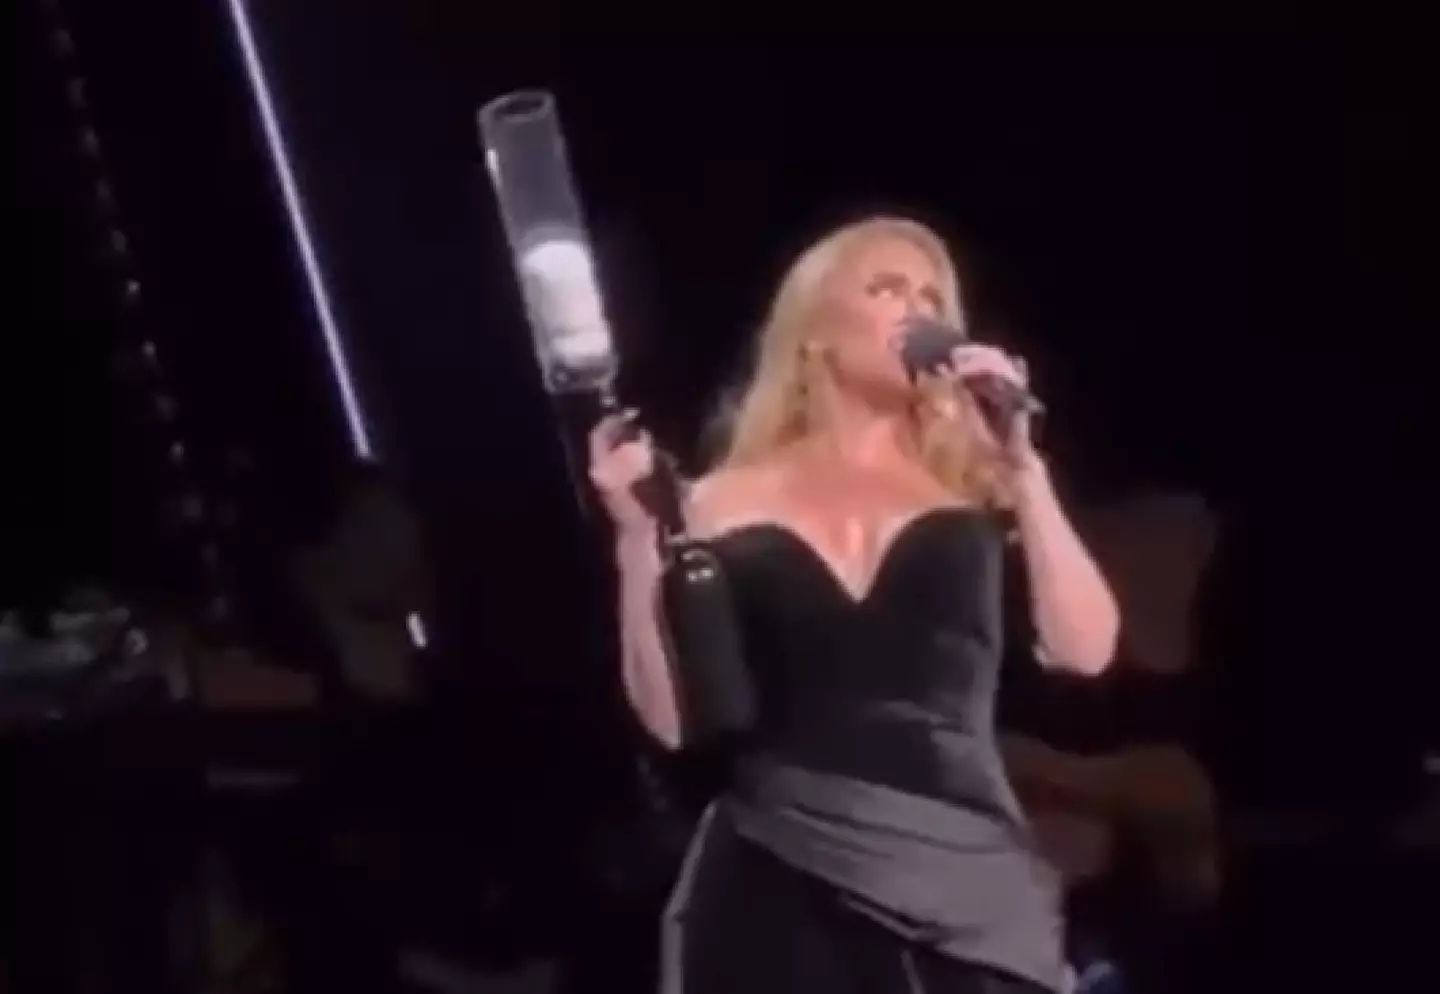 Don't mess with Adele, she'll shoot you with her t-shirt cannon.